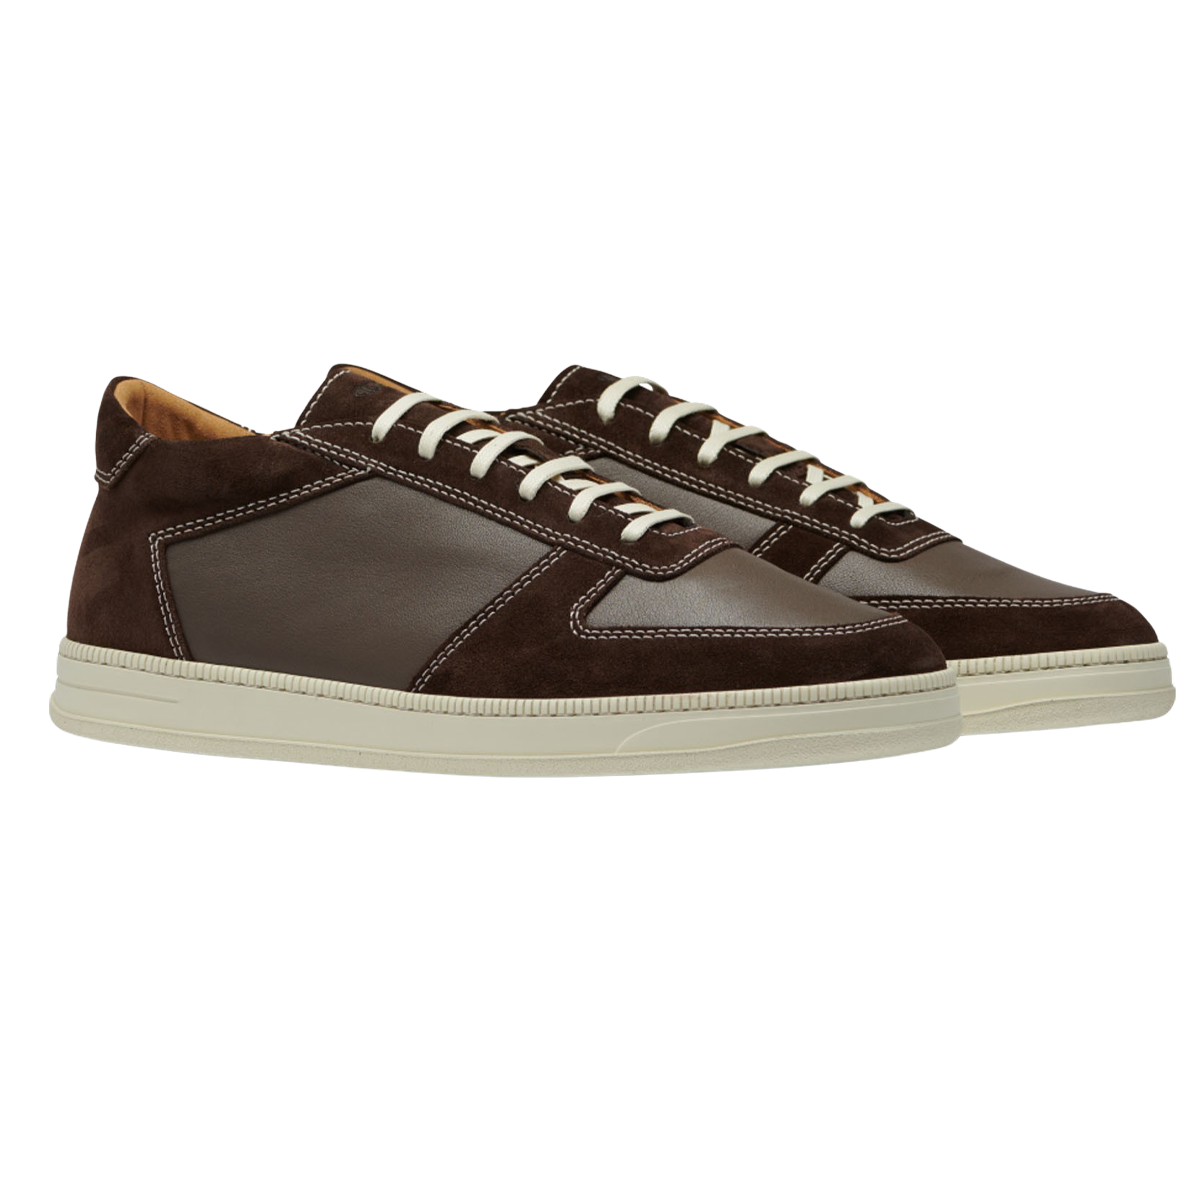 CQP Chocolate Brown Suede Leather Cingo Sneakers Feature